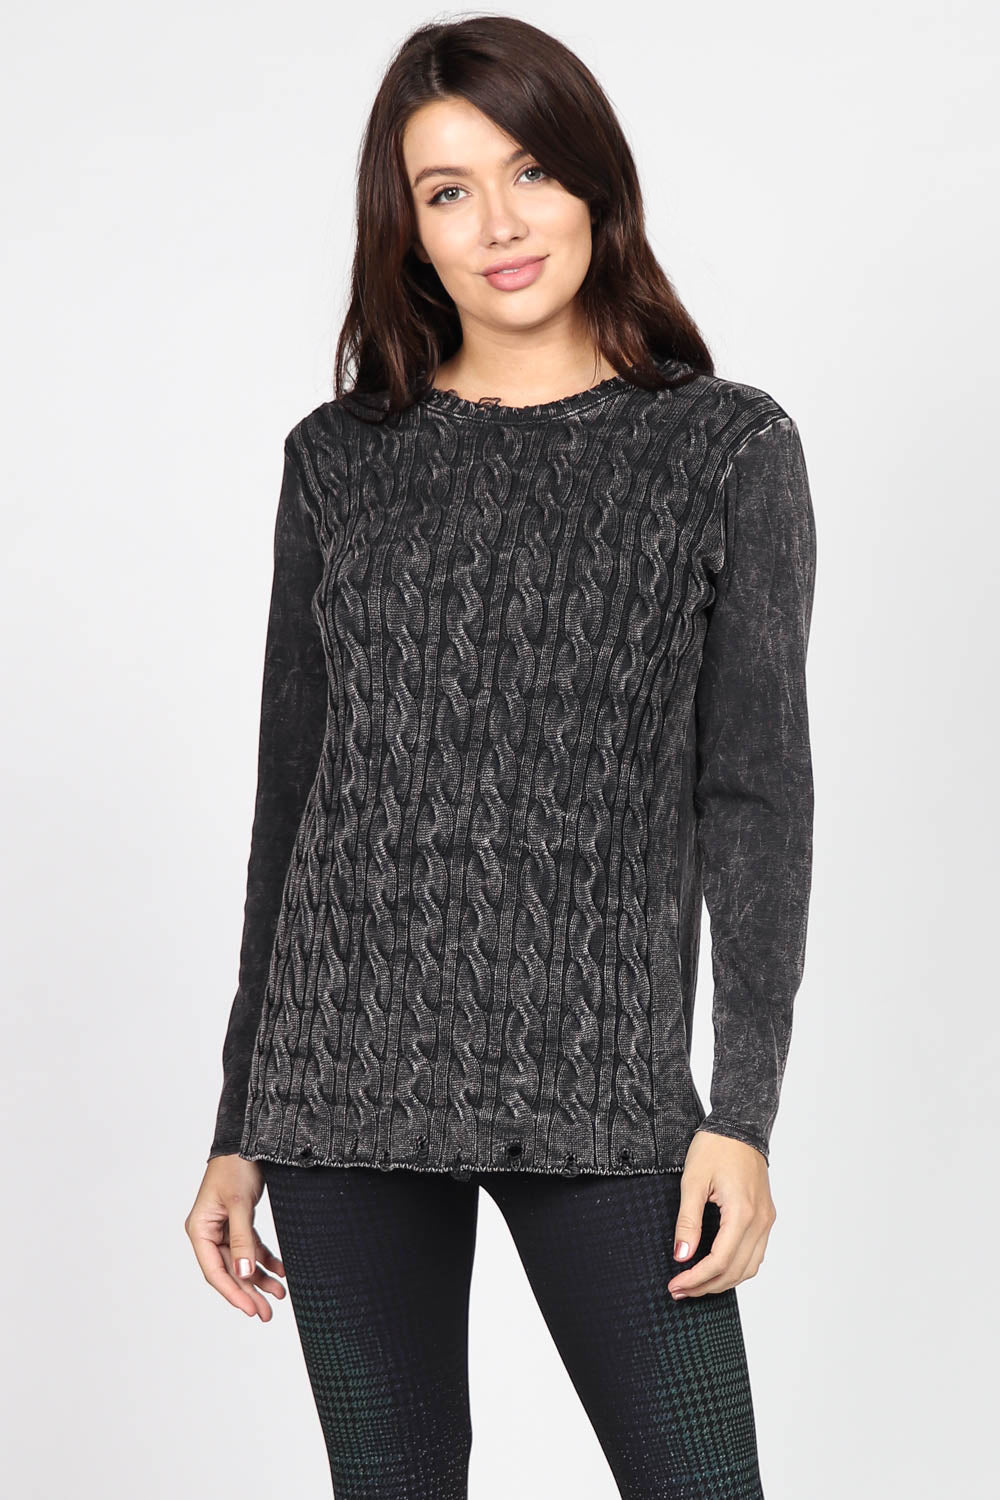 Distressed Cable Knit Tunic